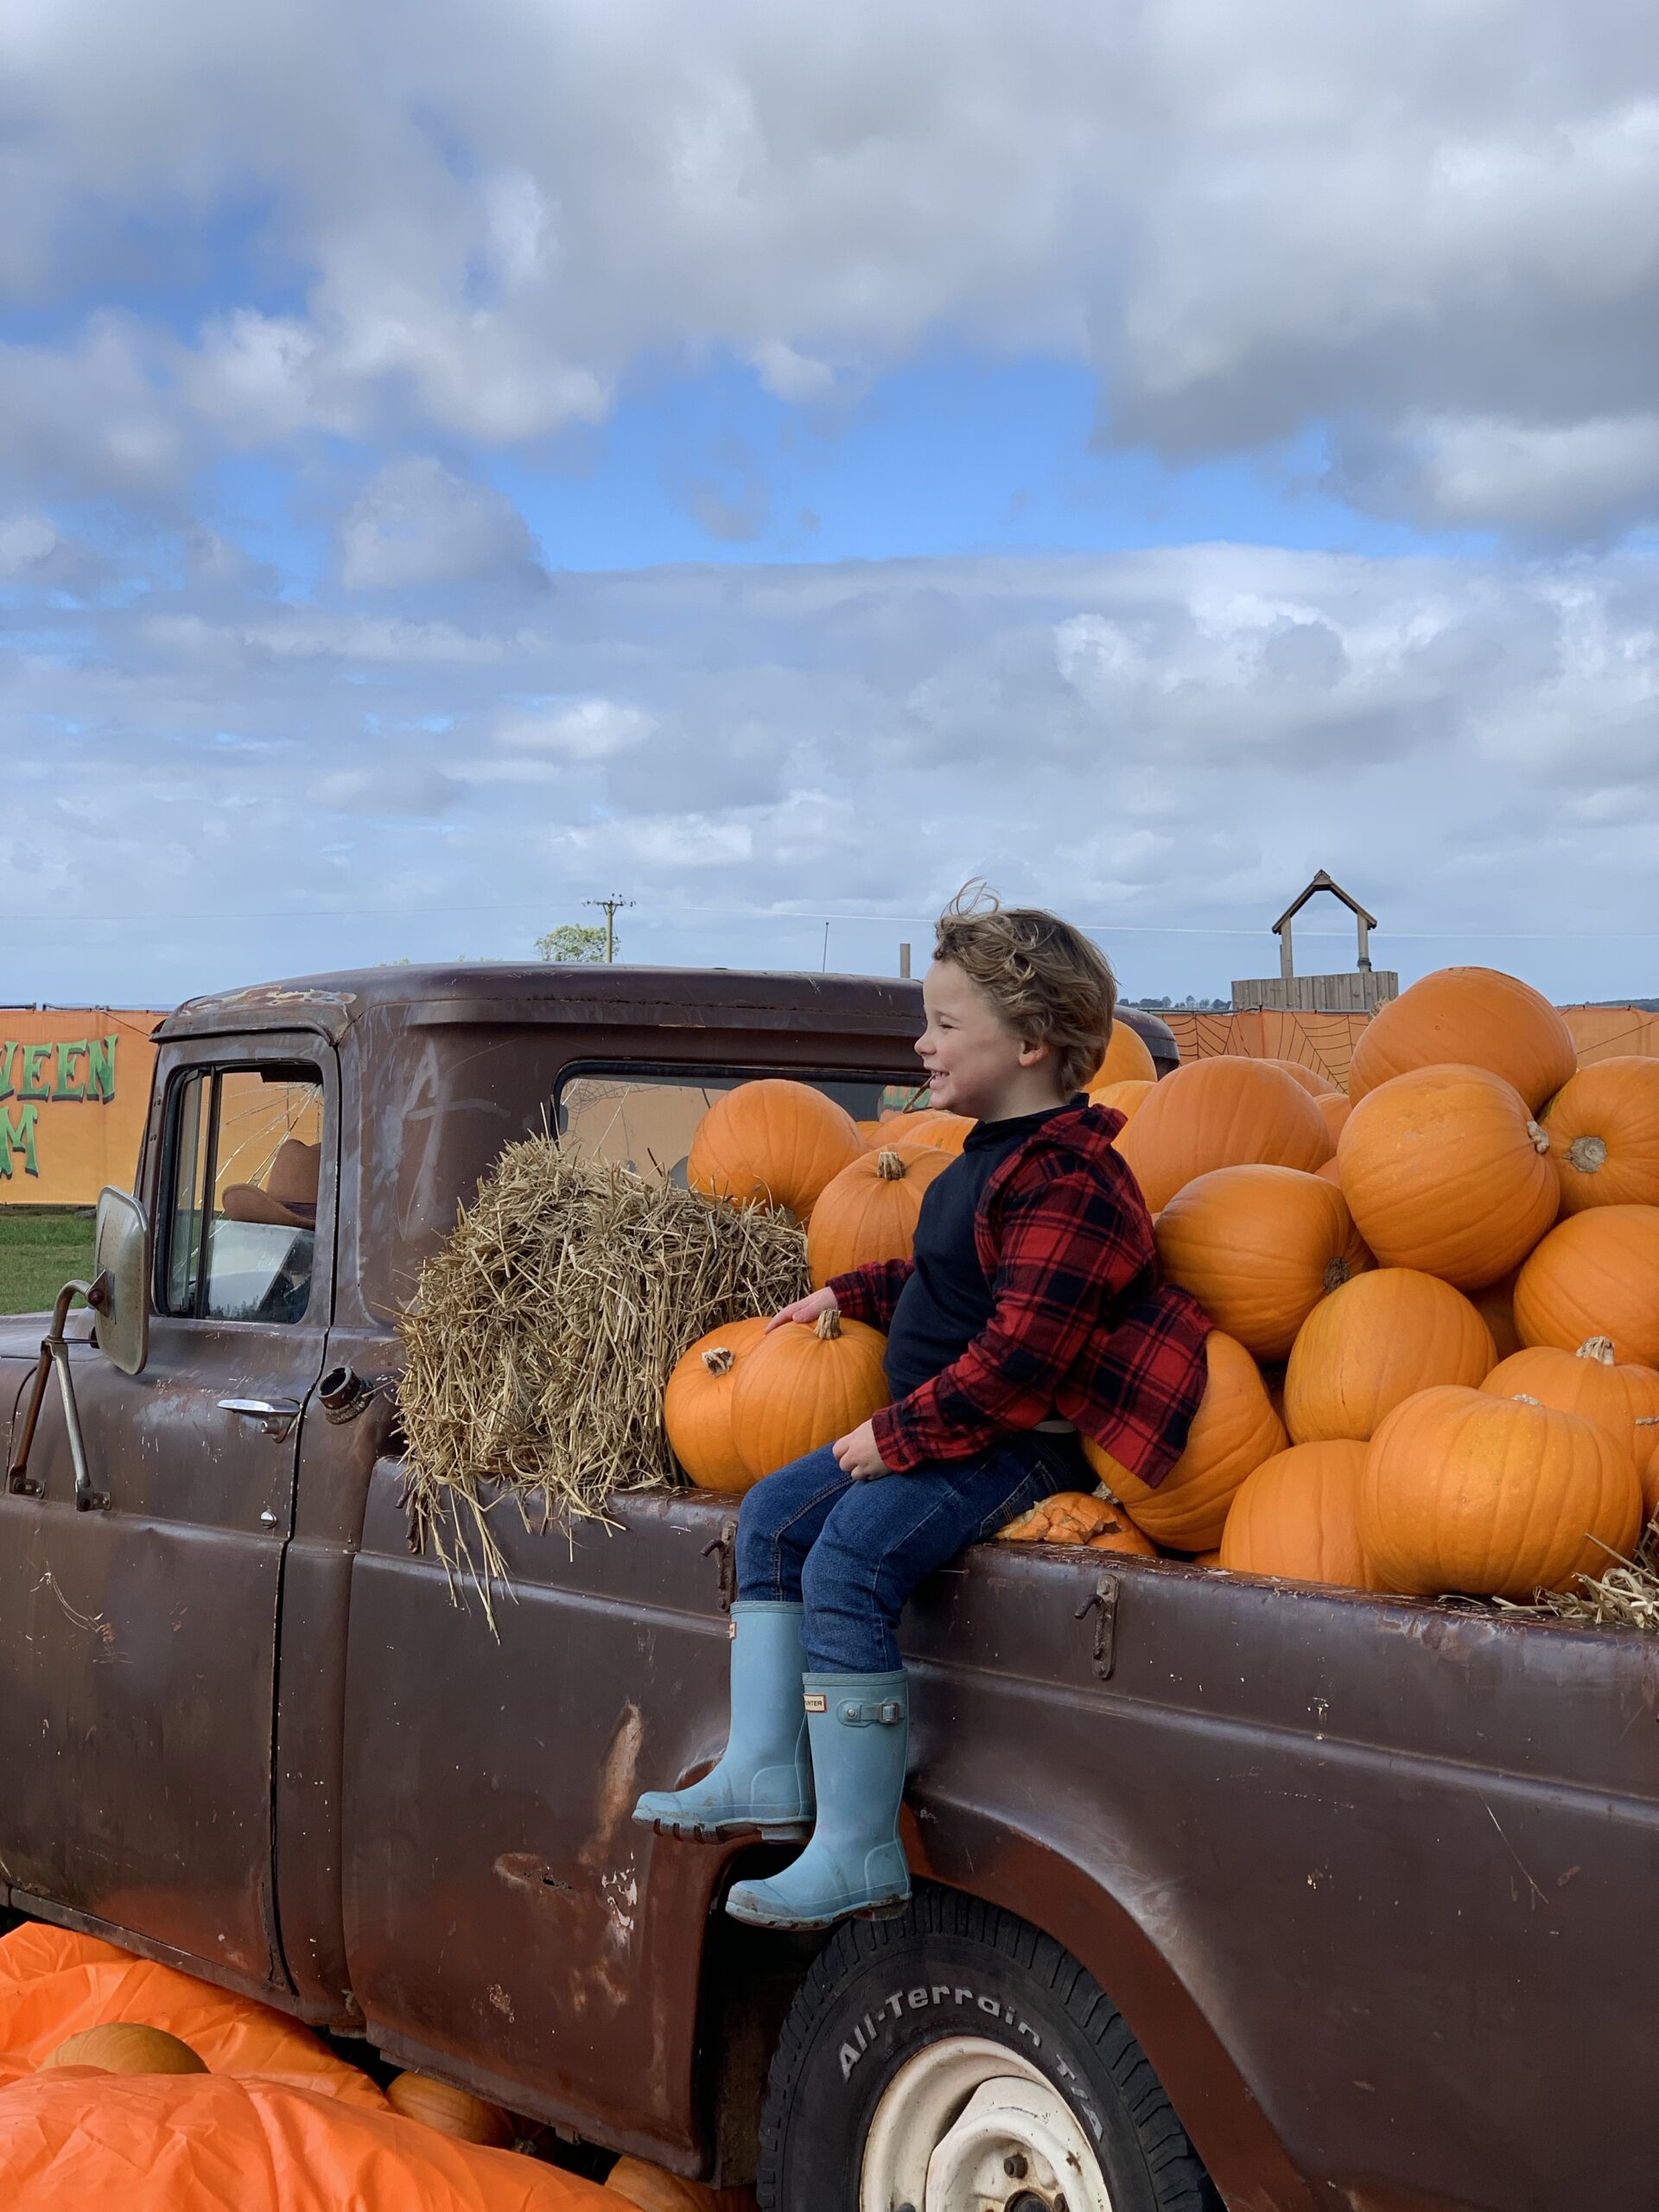 Blonde boy in a plaid shirt and jeans sits in a red truck filled with bright orange pumpkins and hay. He is wearing blue denim jeans and his legs dangle over the side - he is also wearing sky blue wellies. He is smiling with a grin and his curly hair is blowing in the breeze. Taken at Essington Farm - a childrens farm near the west midlands 